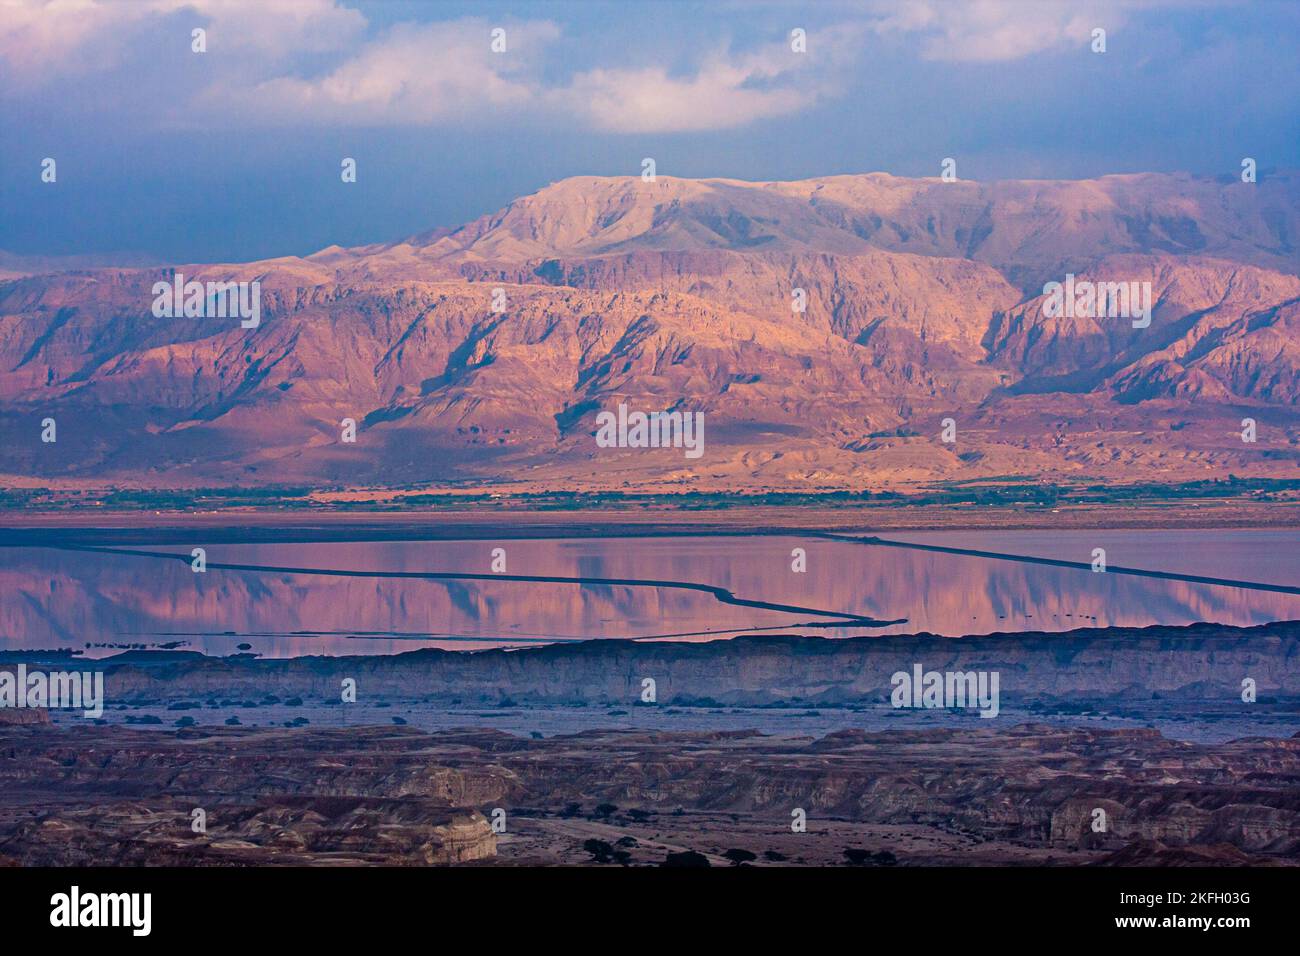 The Dead Sea is the lowest point on earth. Stock Photo